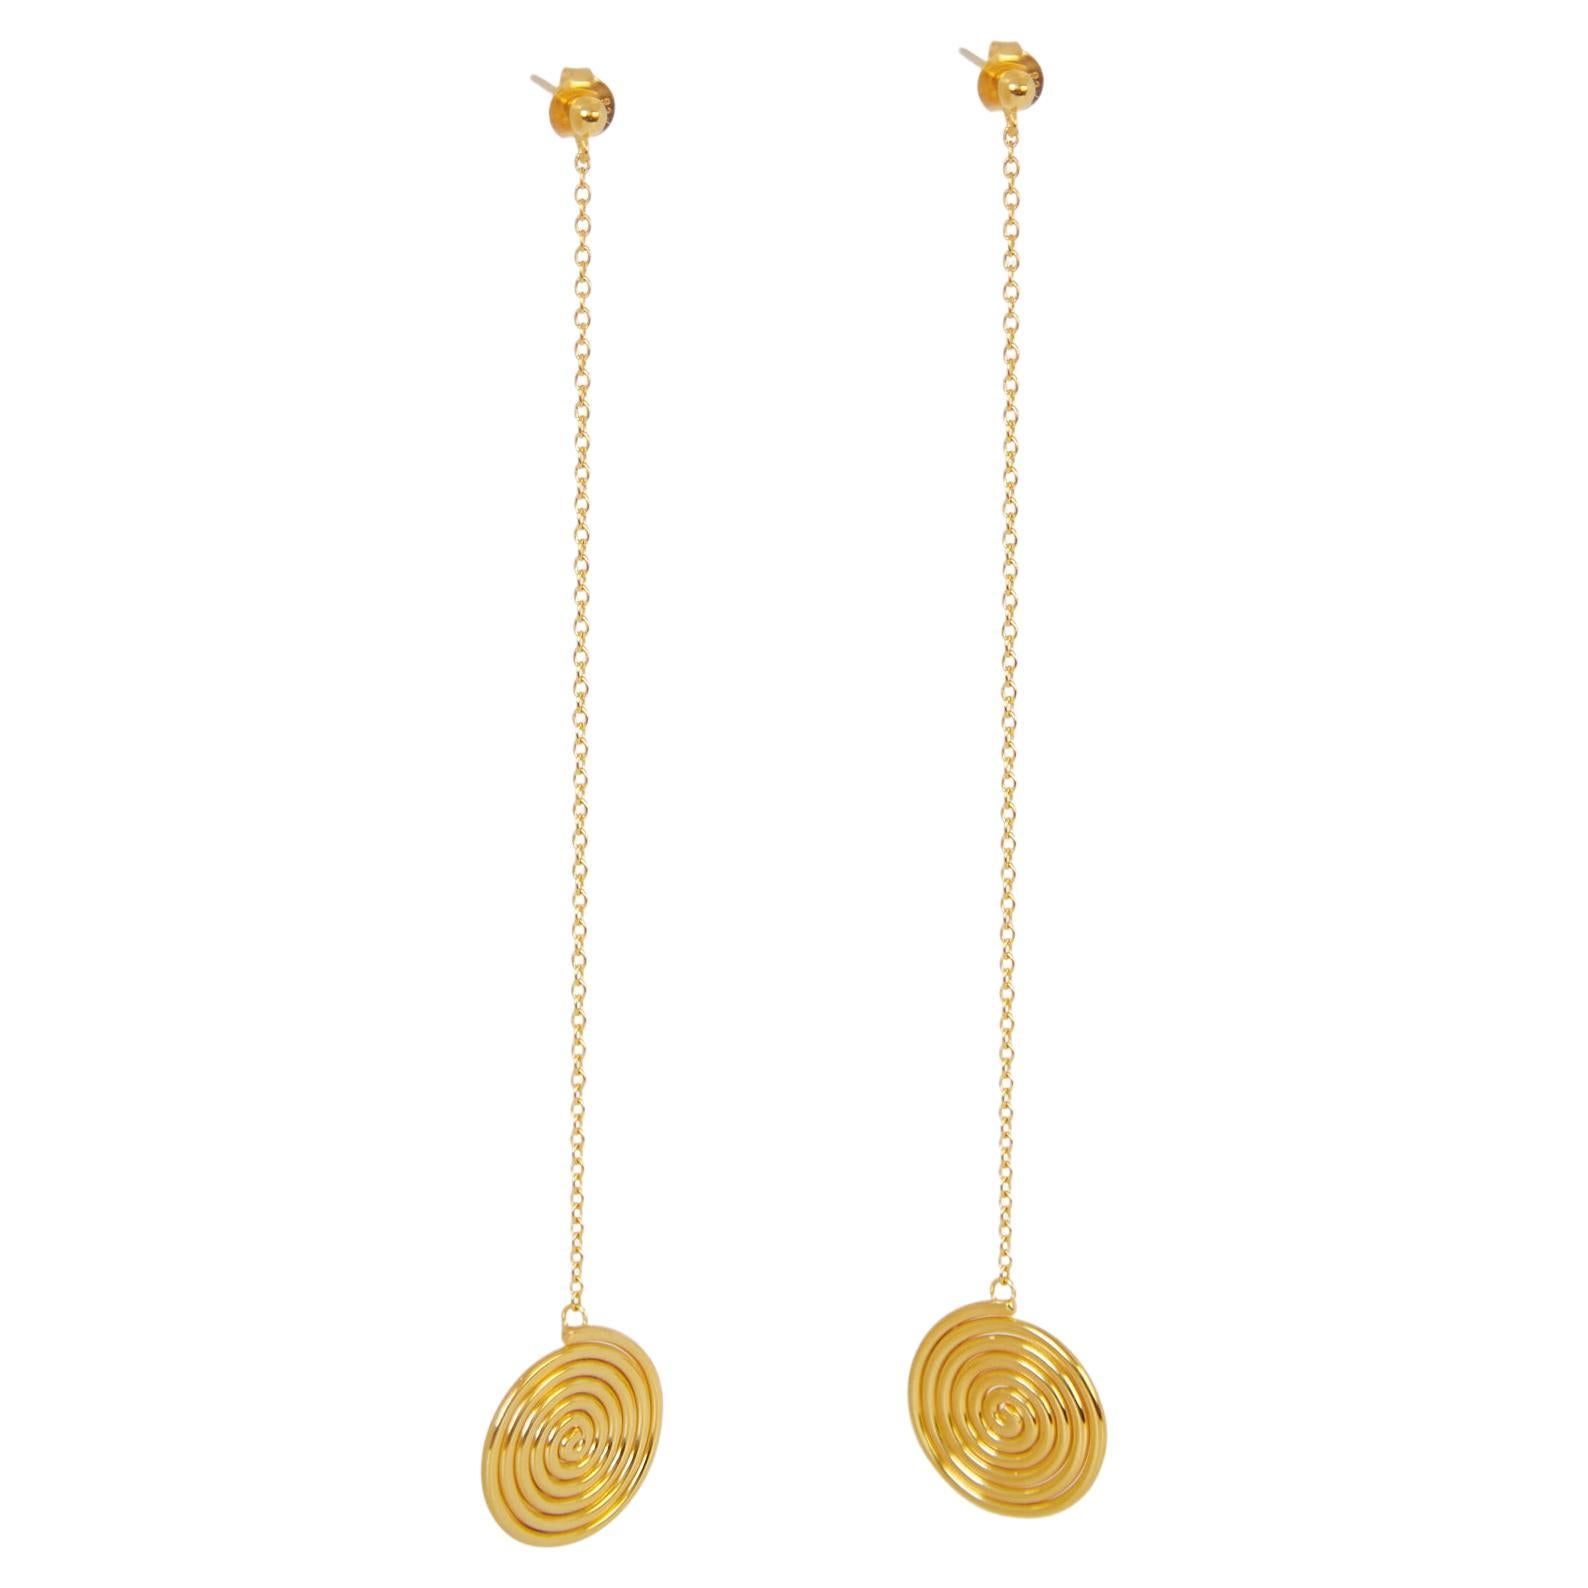 Kinetic Spiral Drop Earrings, 18 Carat Gold Plated Recycled Sterling Silver  For Sale